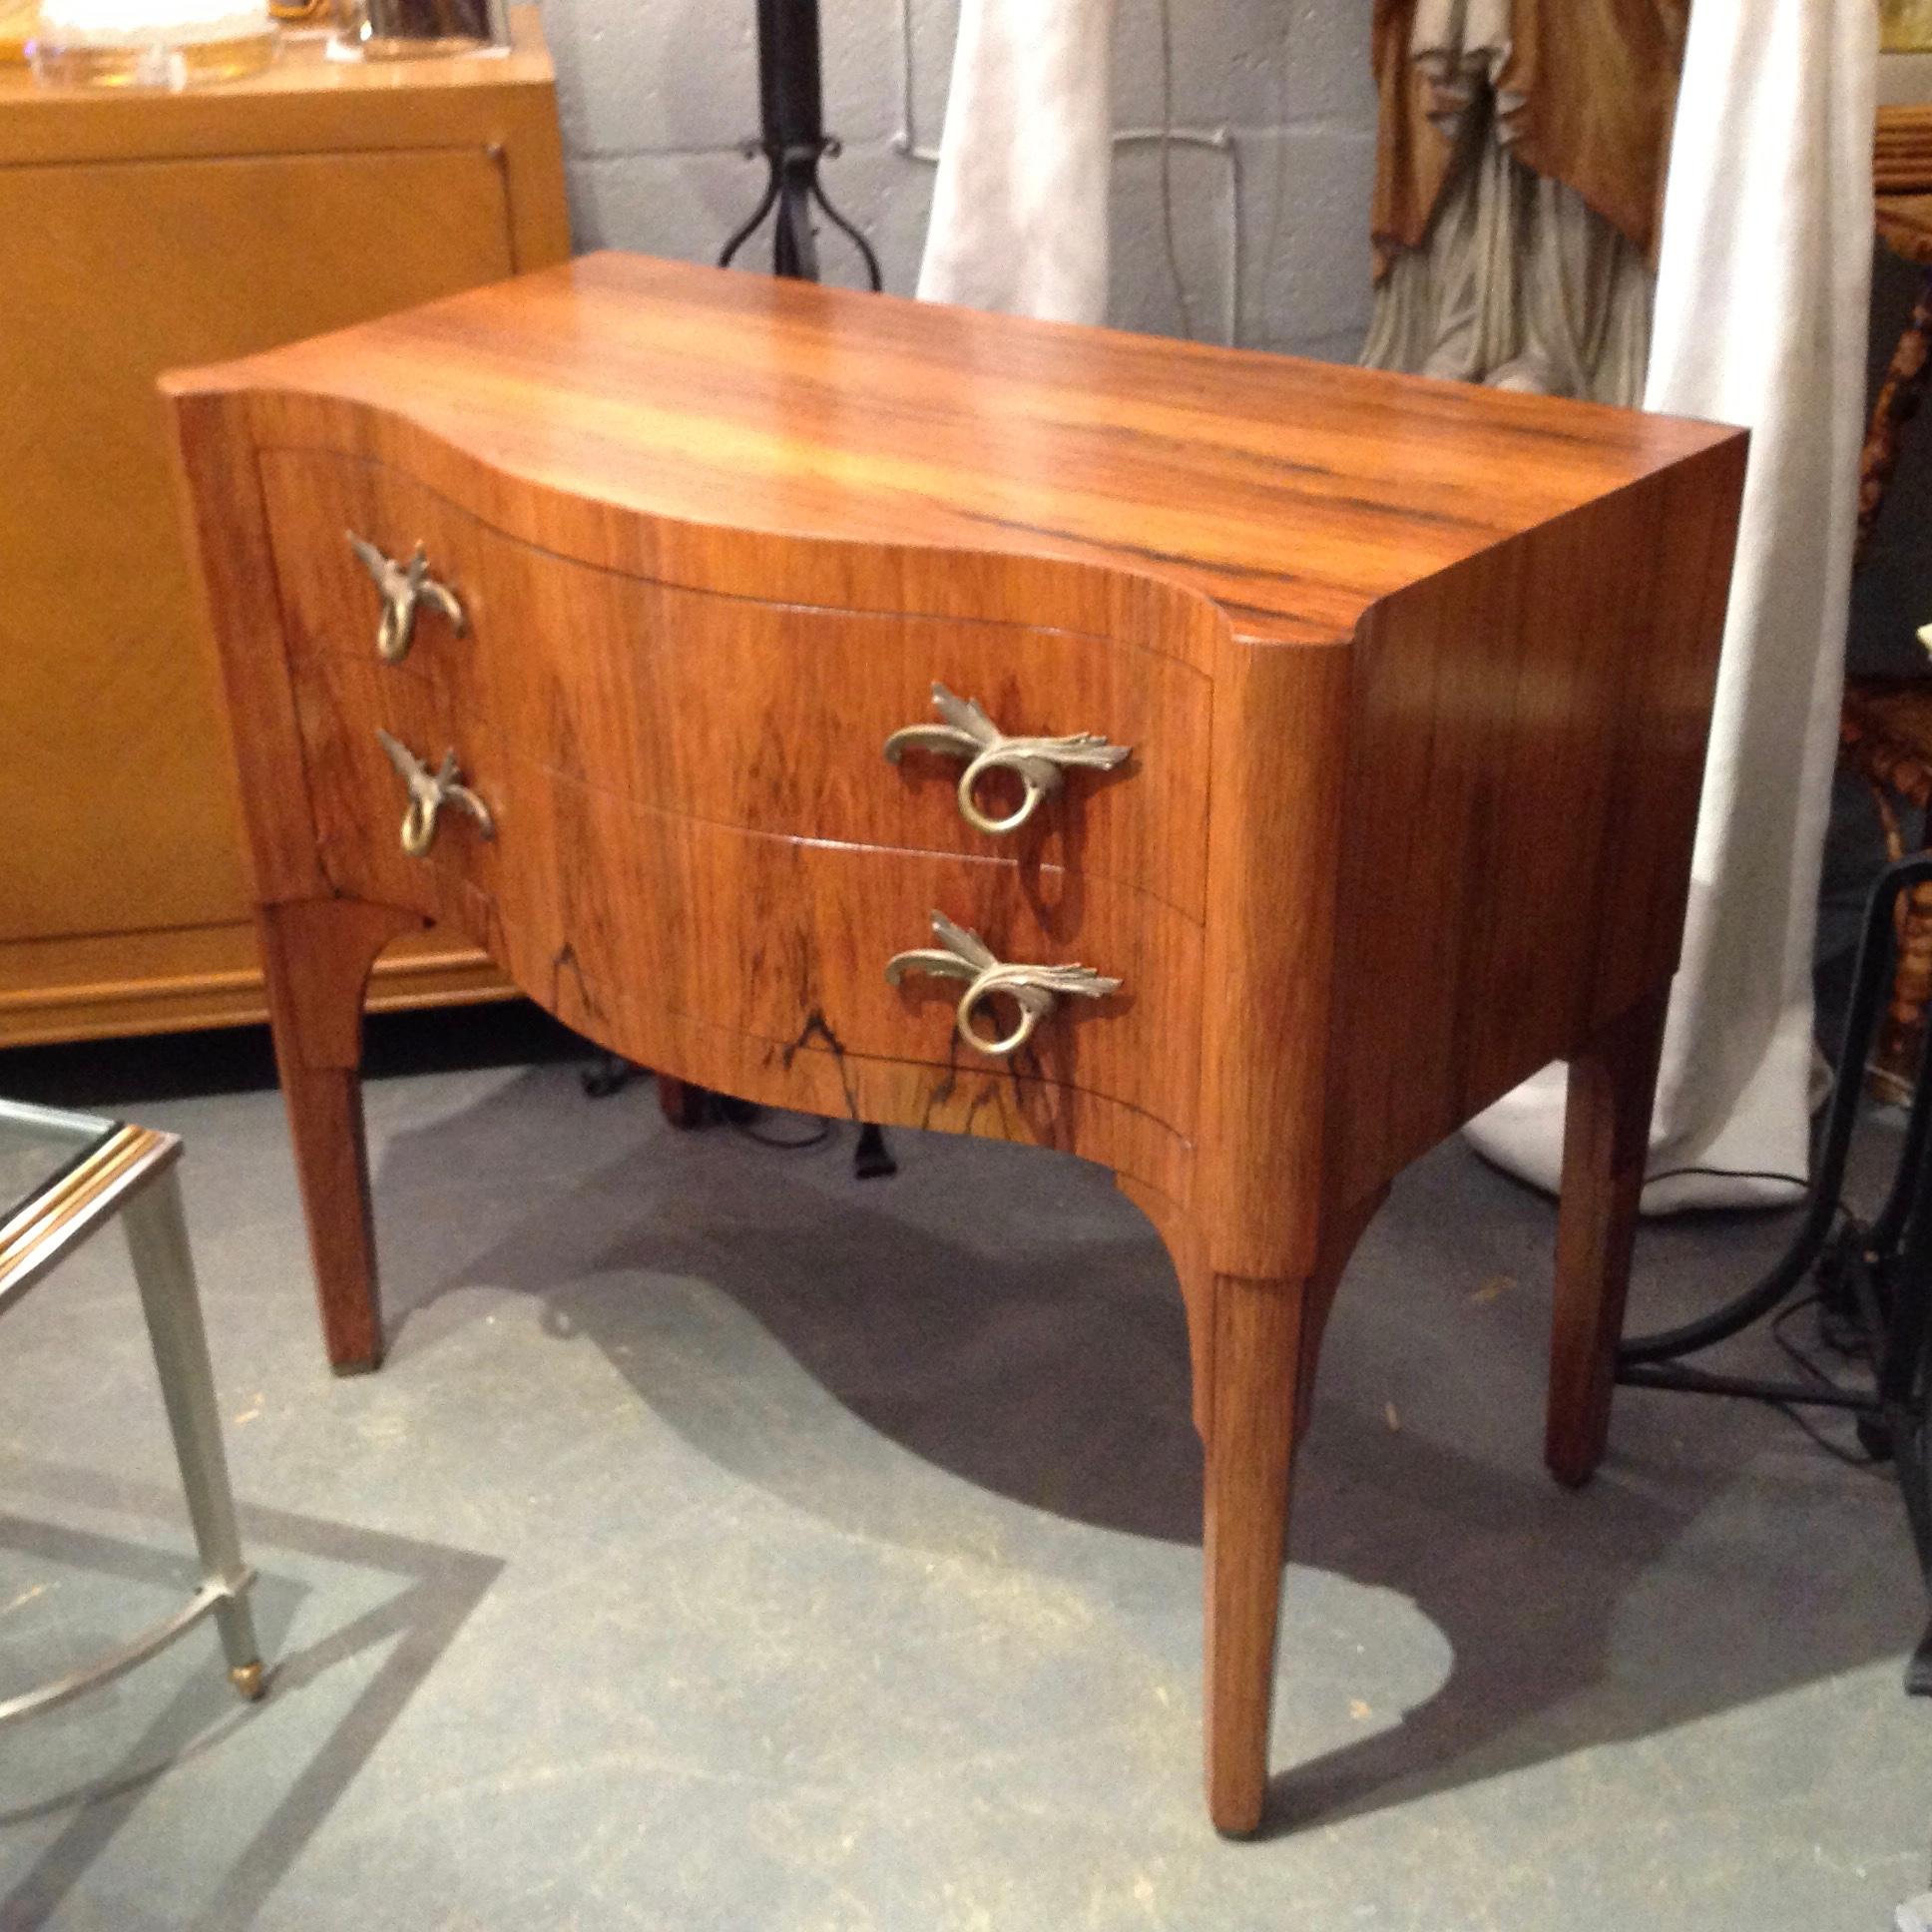 Superb quality signed by the maker. Fashioned with exquisite rosewood veneers and serpentine front.
The petite commode is appointed with stunning doré hardware.